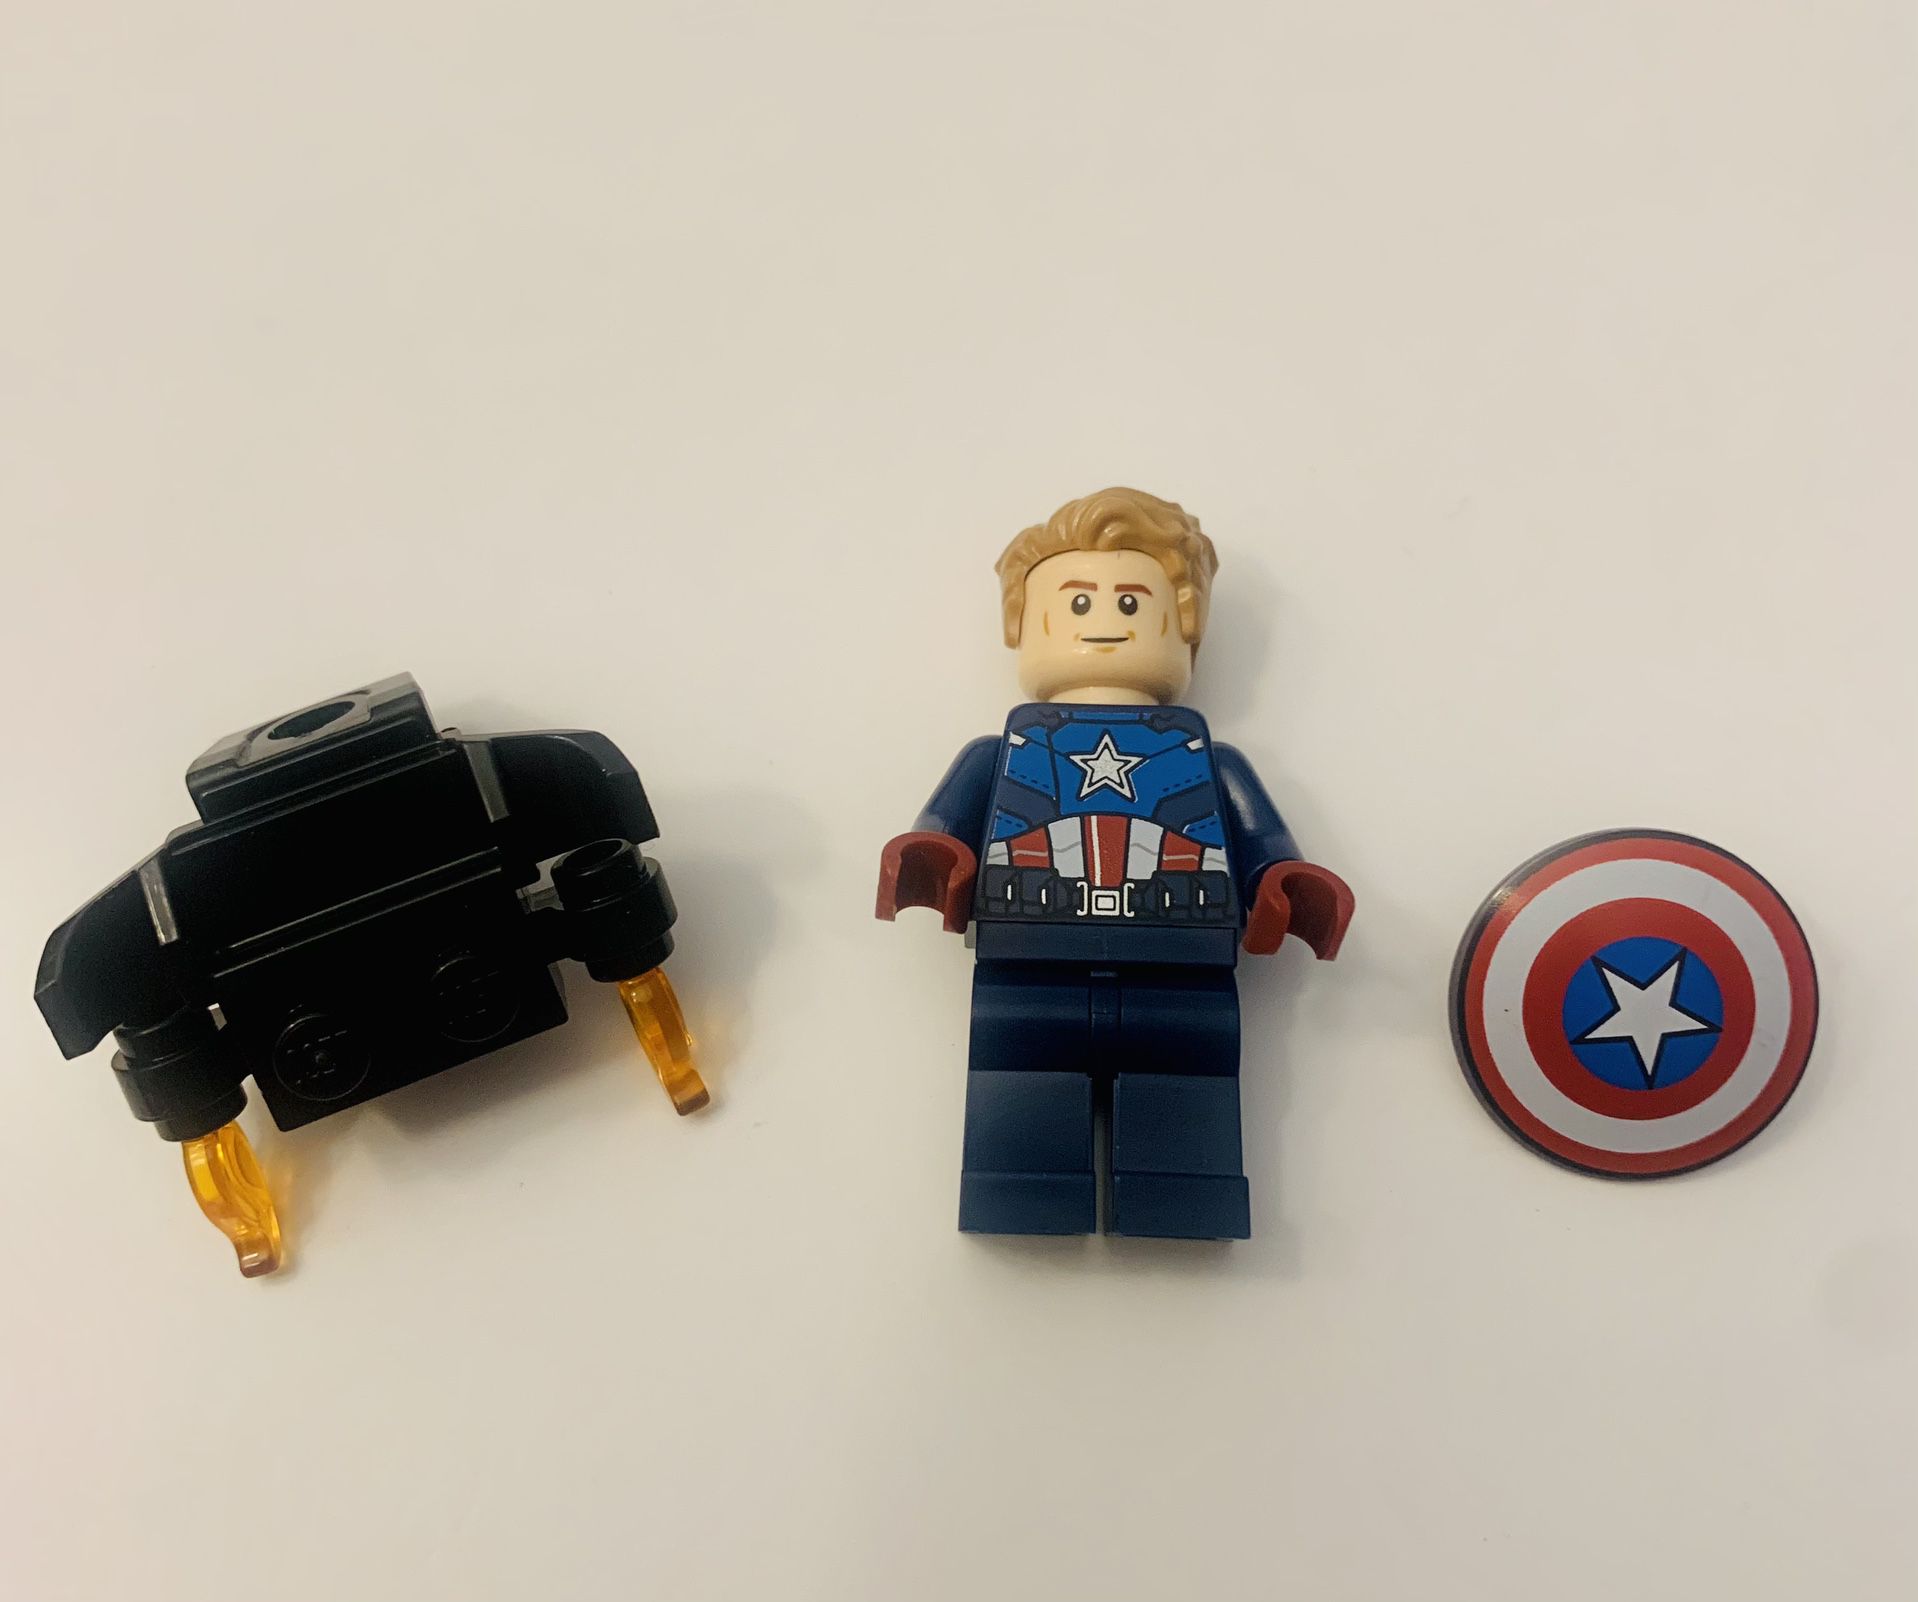 Lego Marvel Super Heroes Captain America Minifigure with Jet Pack #76267